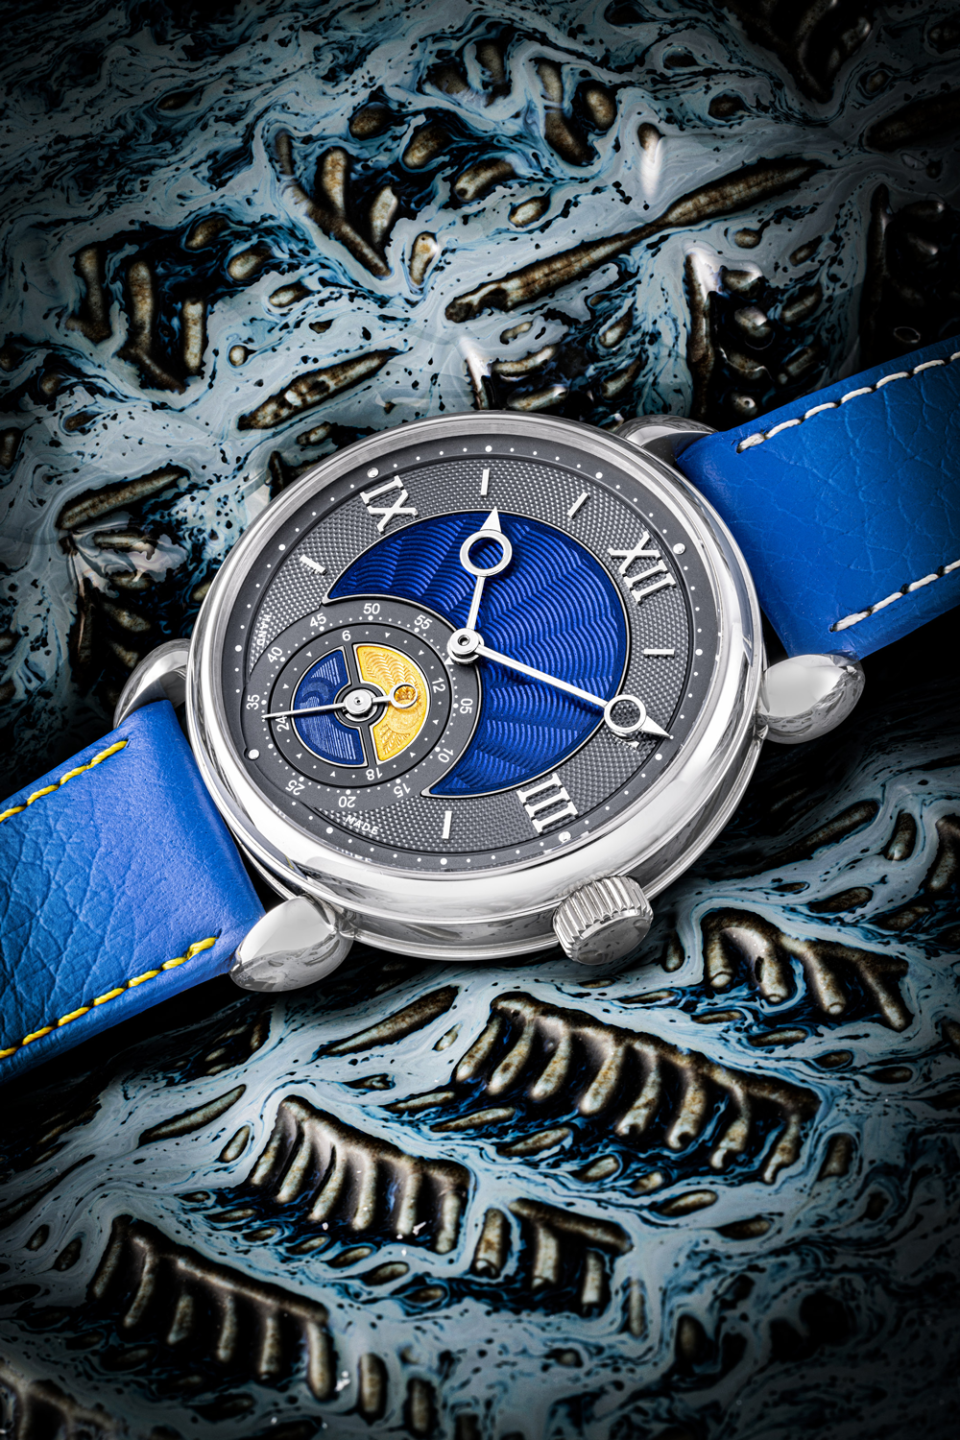 One-of-a-Kind Kari Voutilainen Watch Made for Only Watch 2015